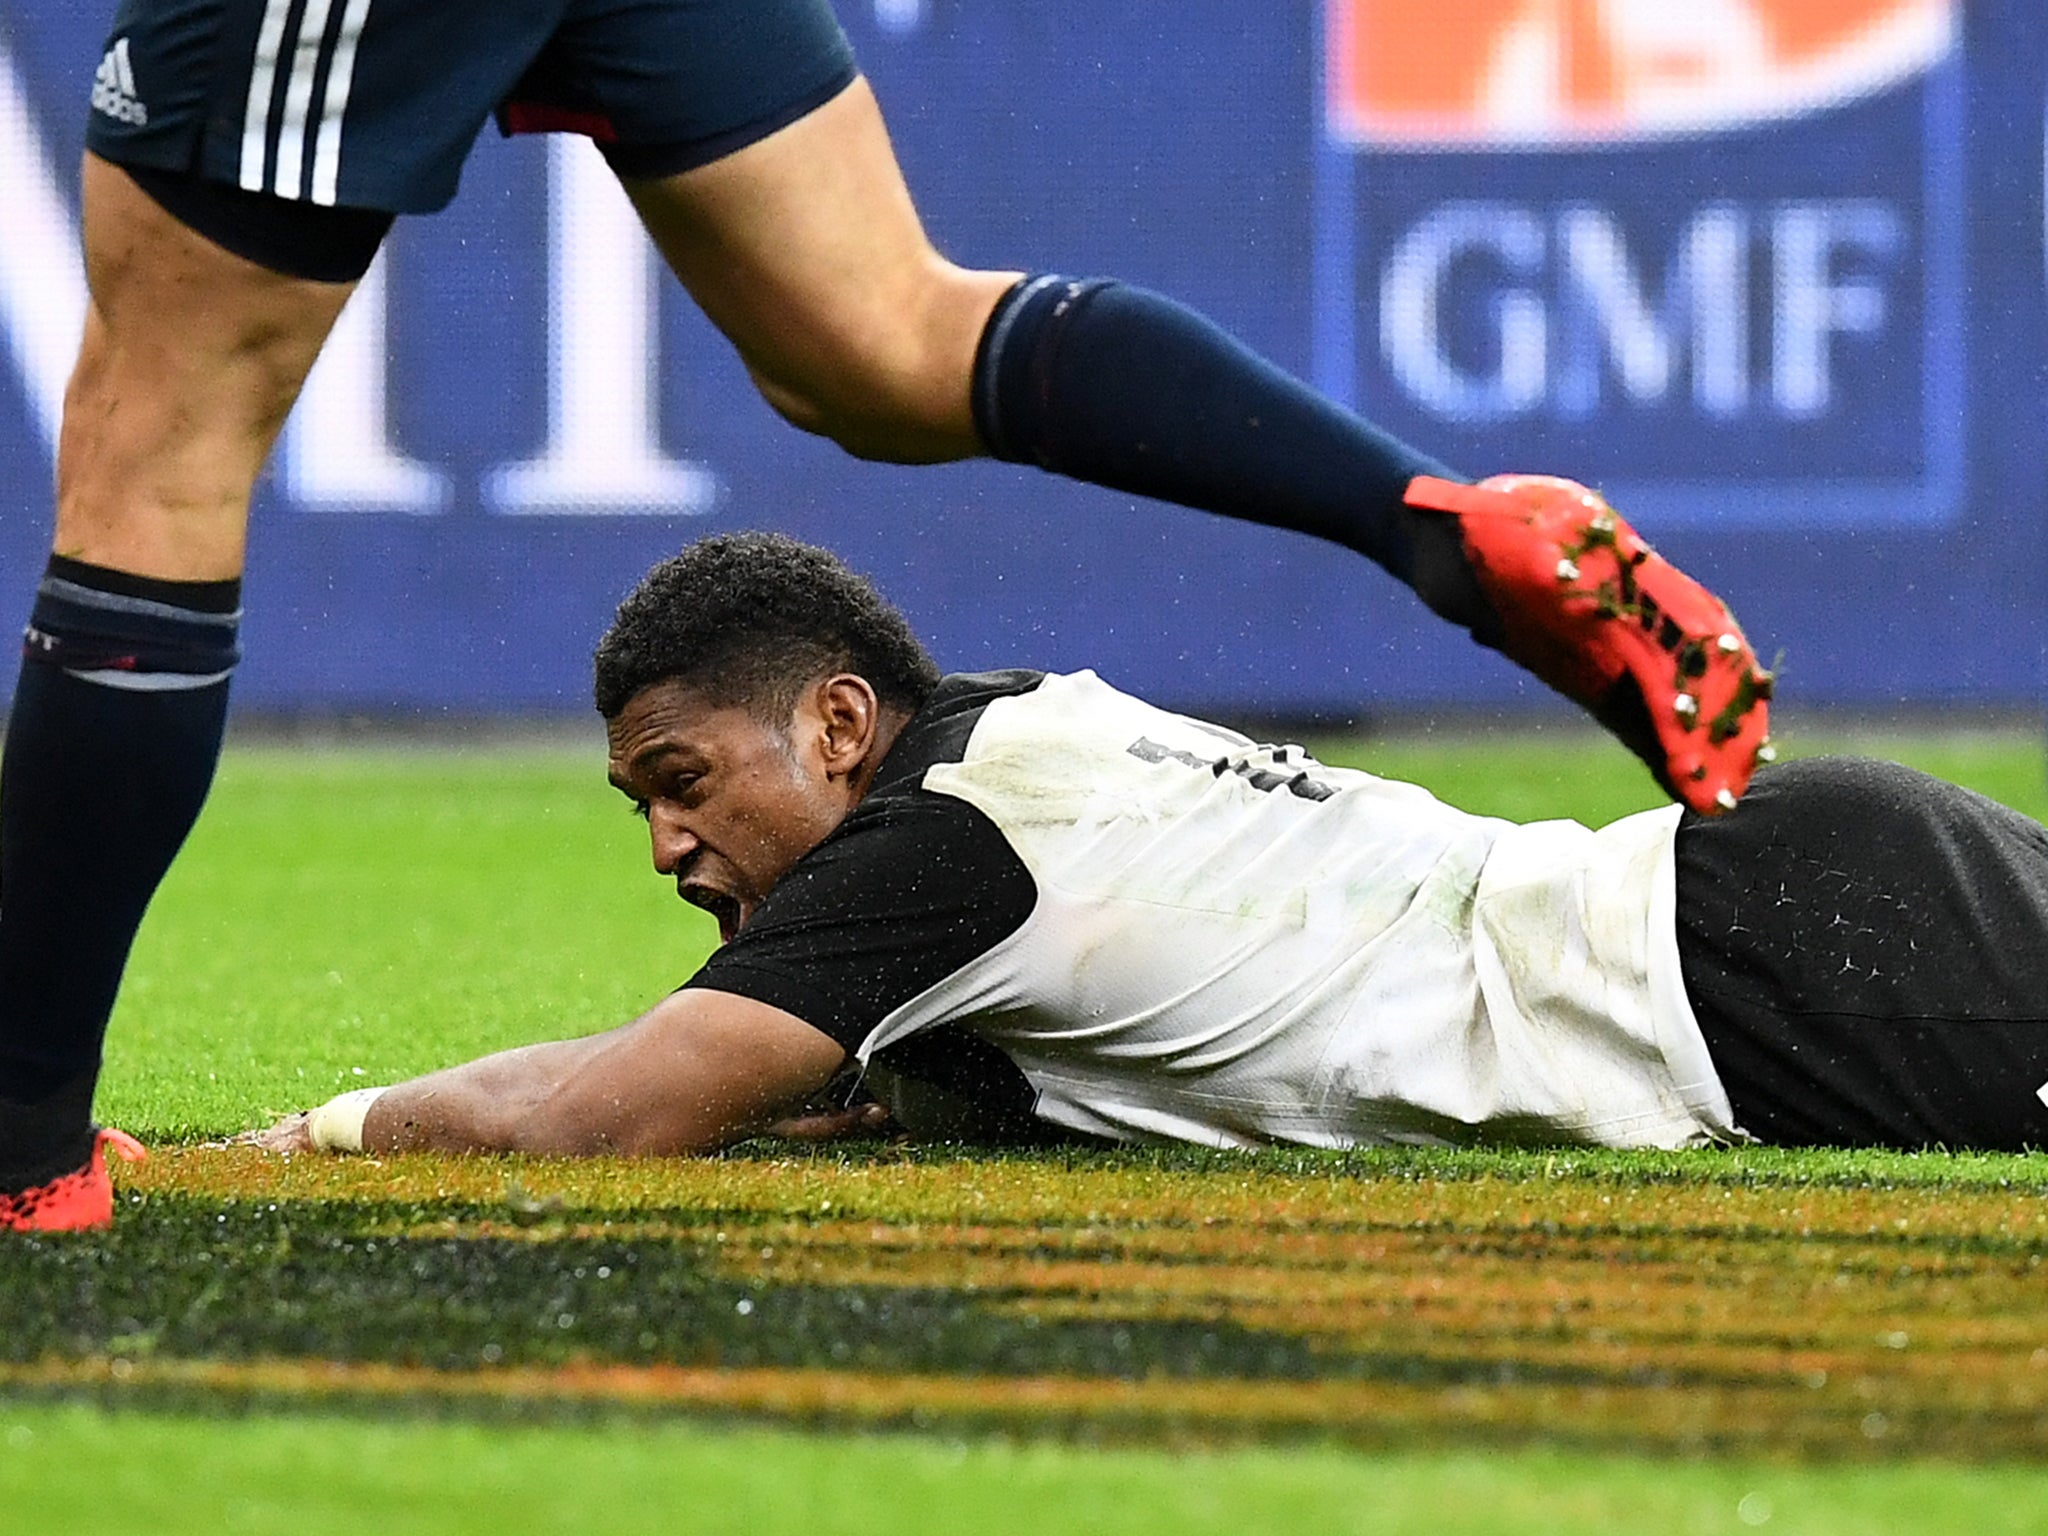 Waisake Naholo scores his second try to seal the victory